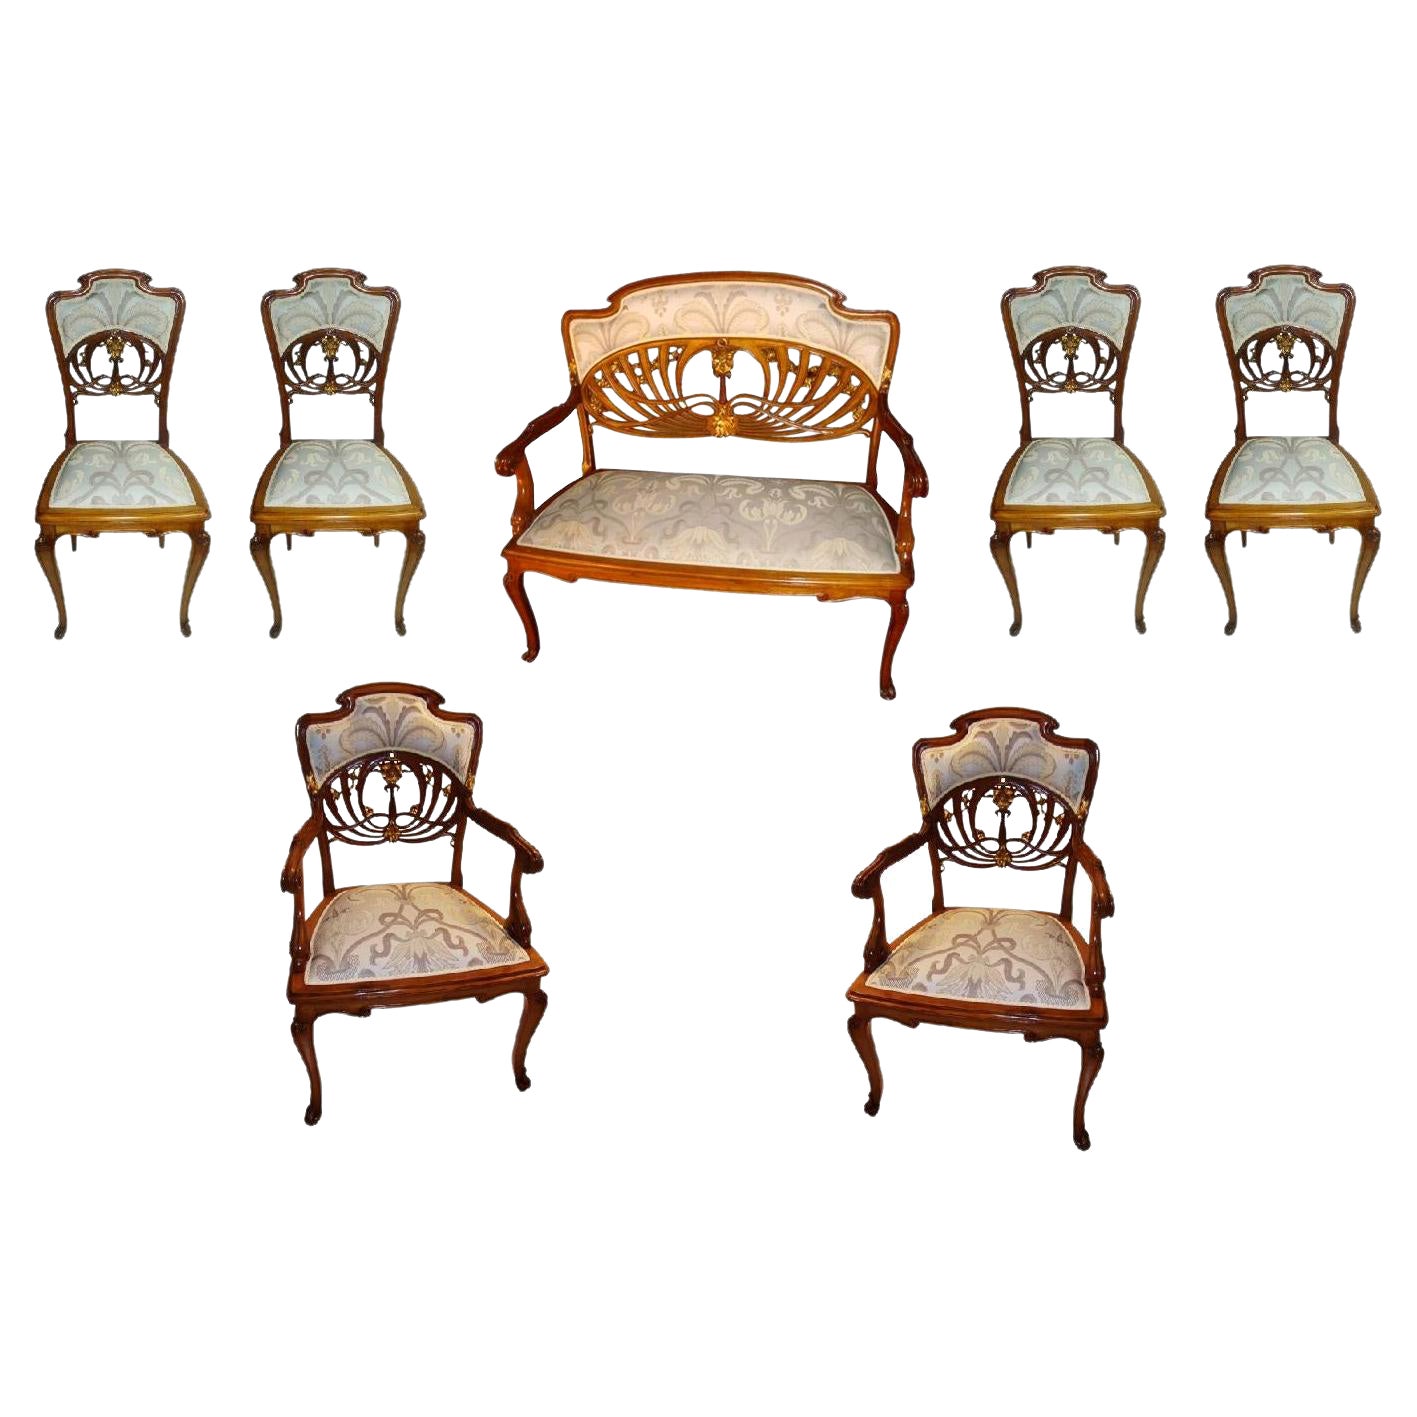 Unusual Art Nouveau Set, 1 Sofa, 2 Armchairs, 4 Chairs, Country, France, 1900